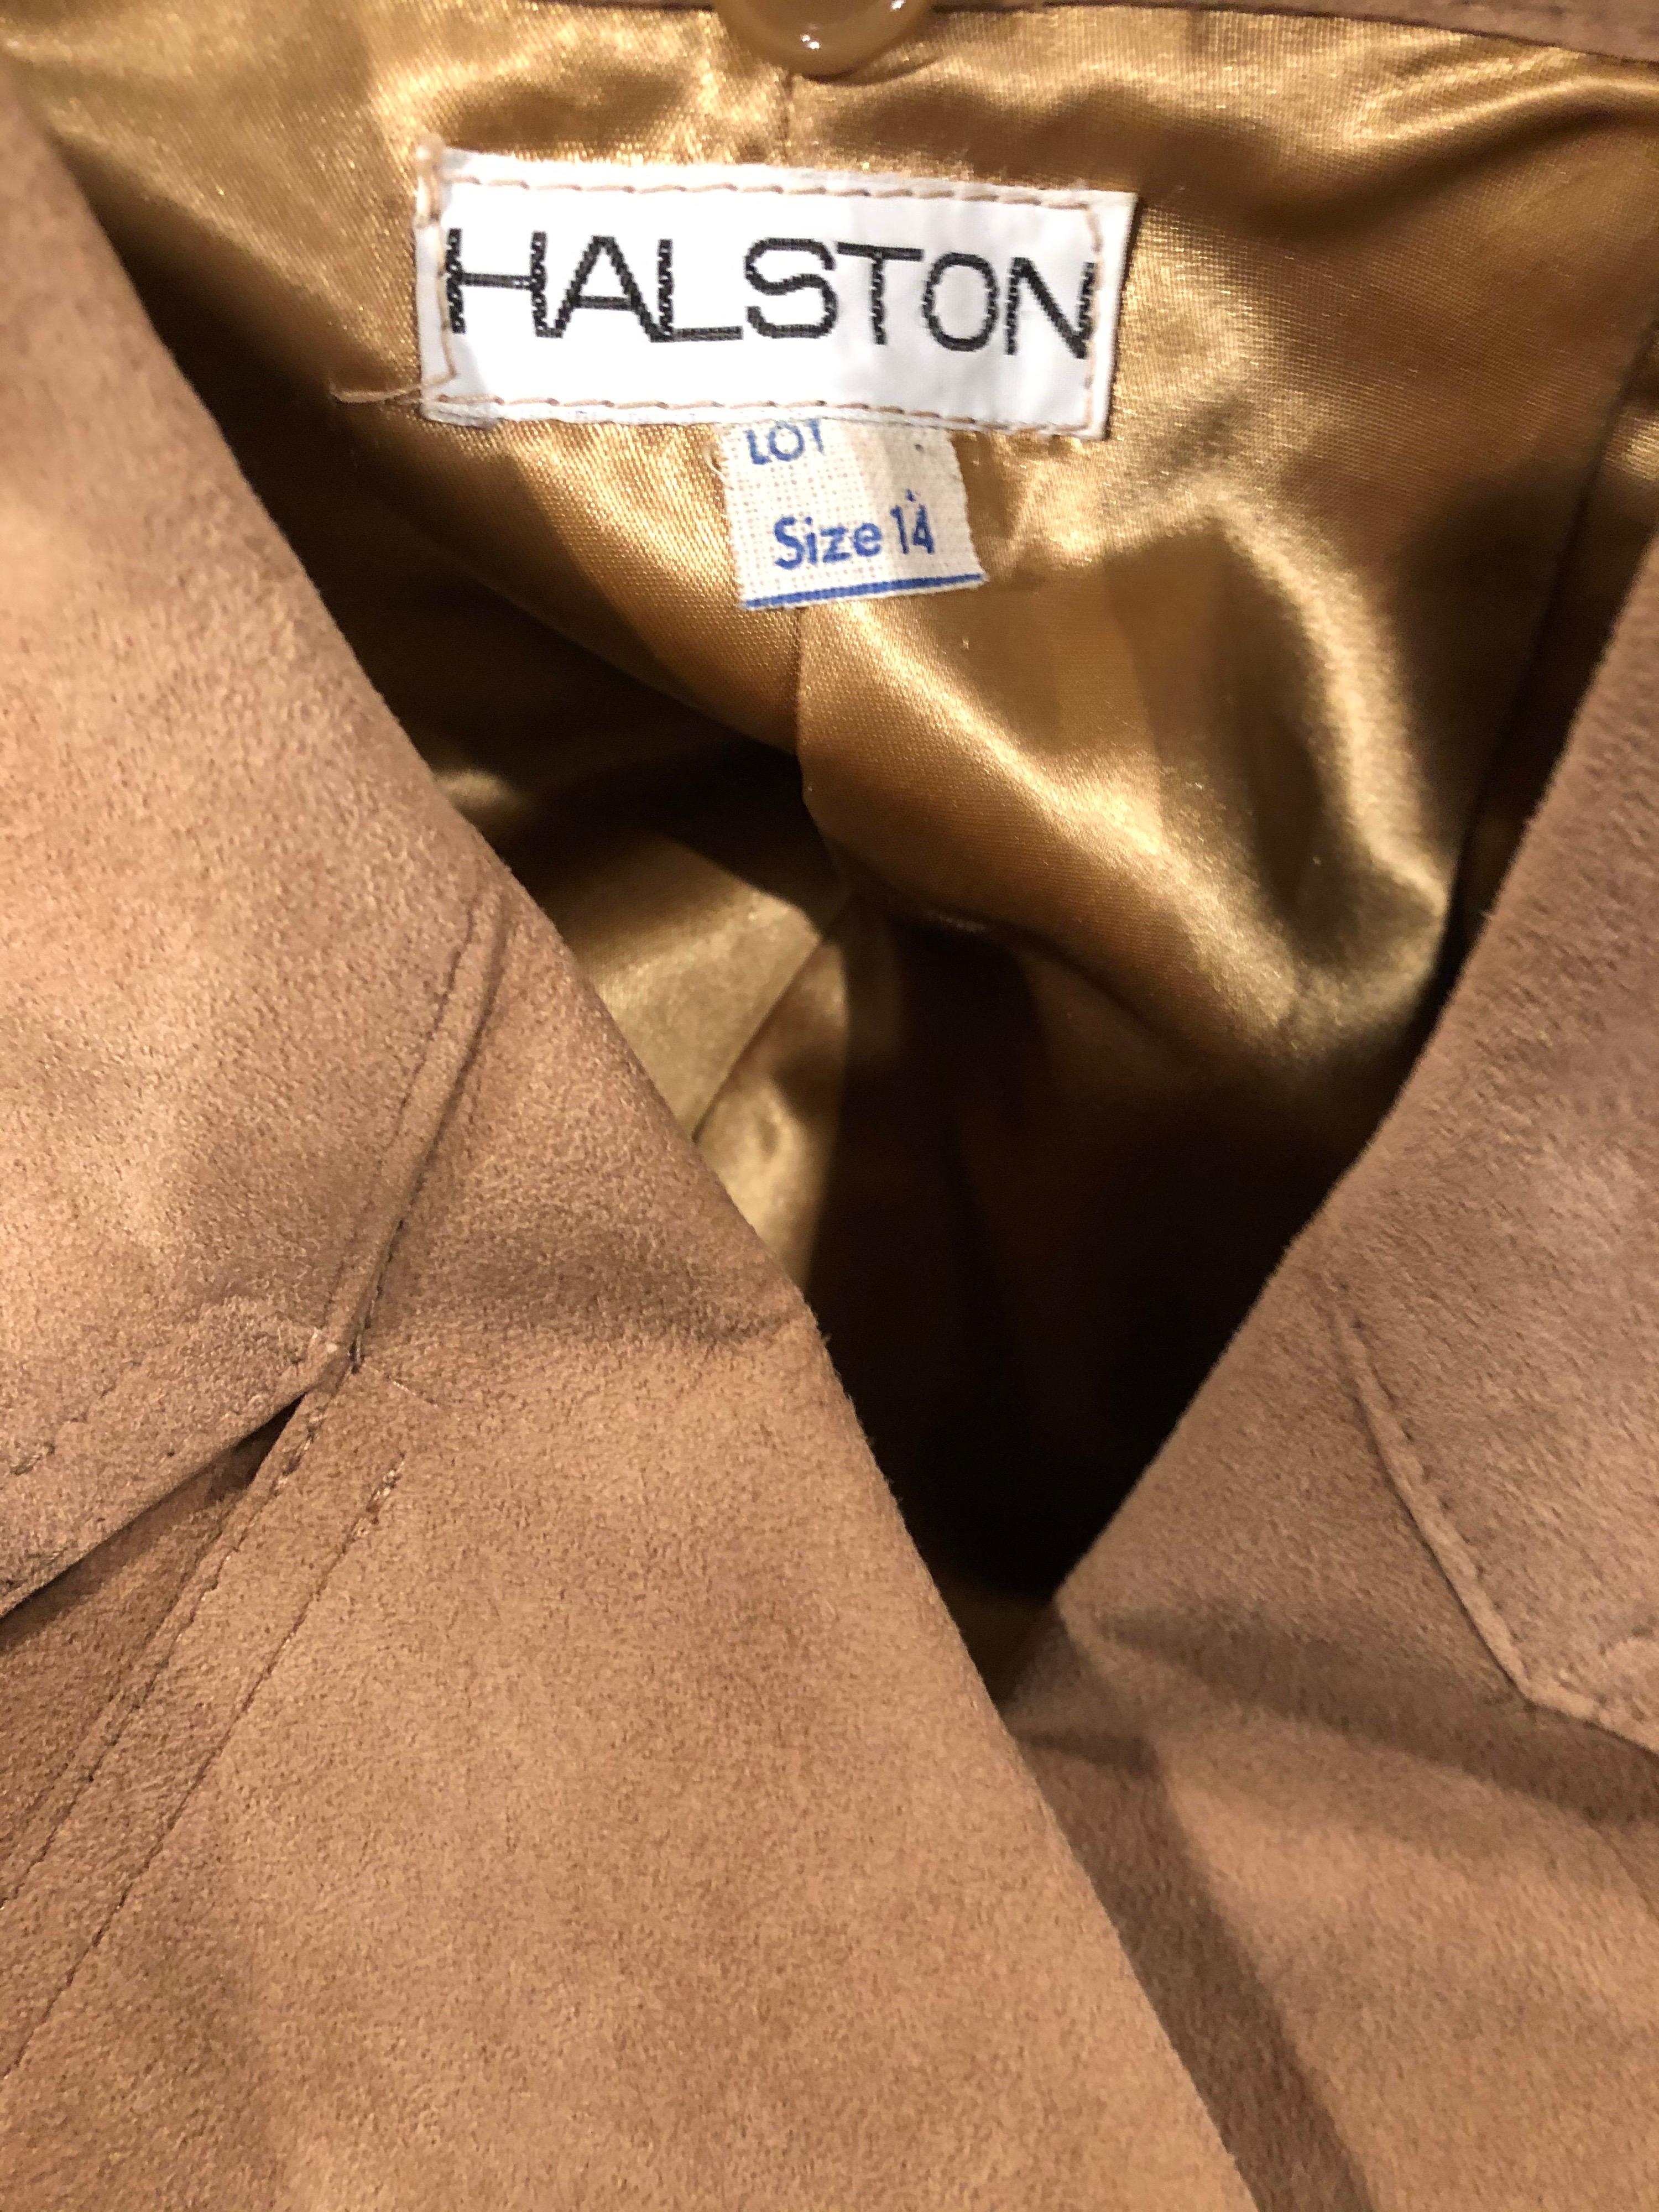 Classic vintage 70s HALSTON Ultrasuede khaki / light brown double breasted spy trench jacket / coat ! Features the classic soft and wearable ultra suede fabric Halston created that is perfect for all year wear. Double breasted style with a